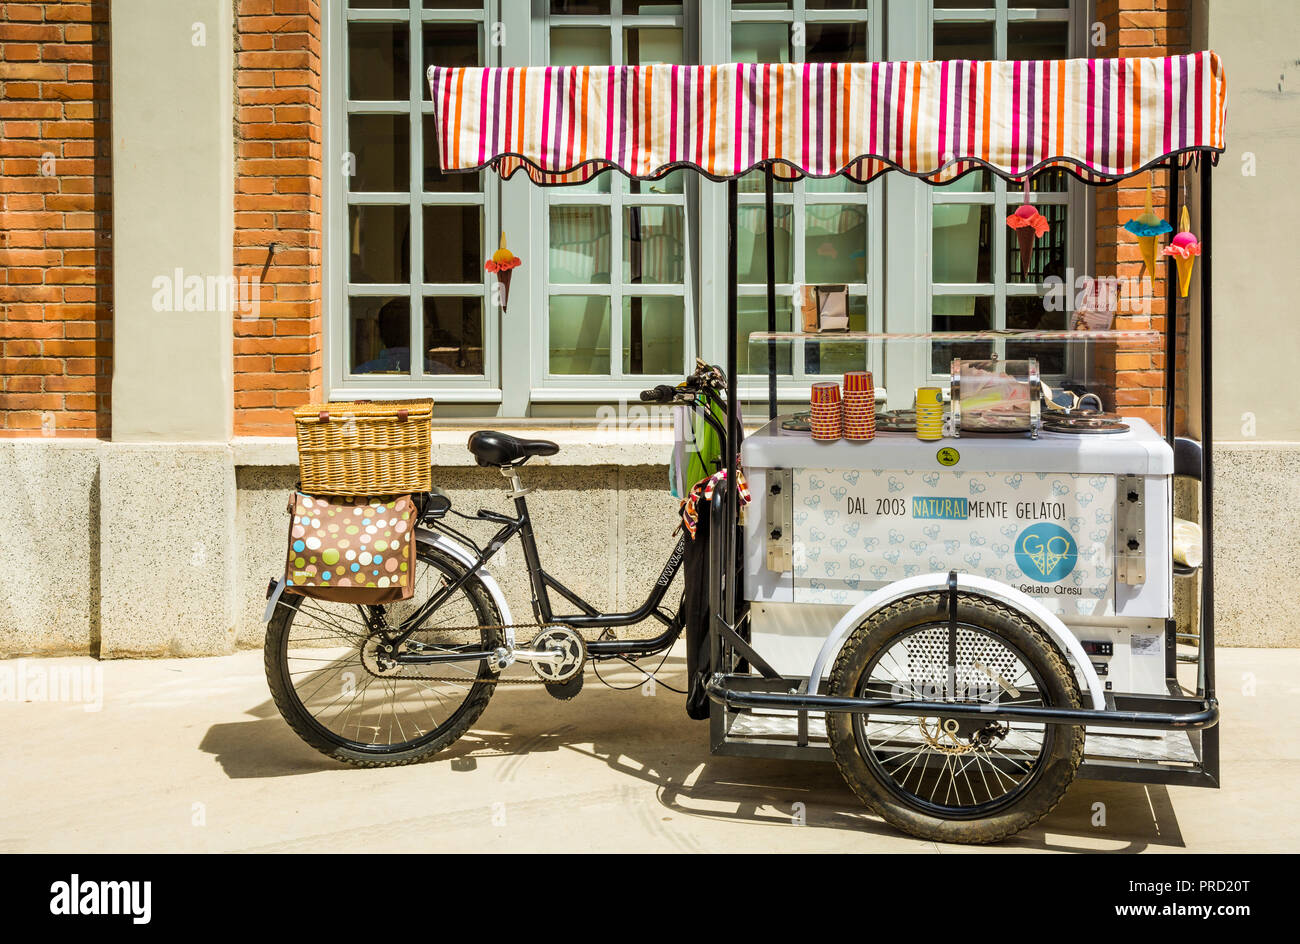 An ice cream cart is built on a bicycle in Cagliari, Sardinia, Italy. Vintage effect Stock Photo